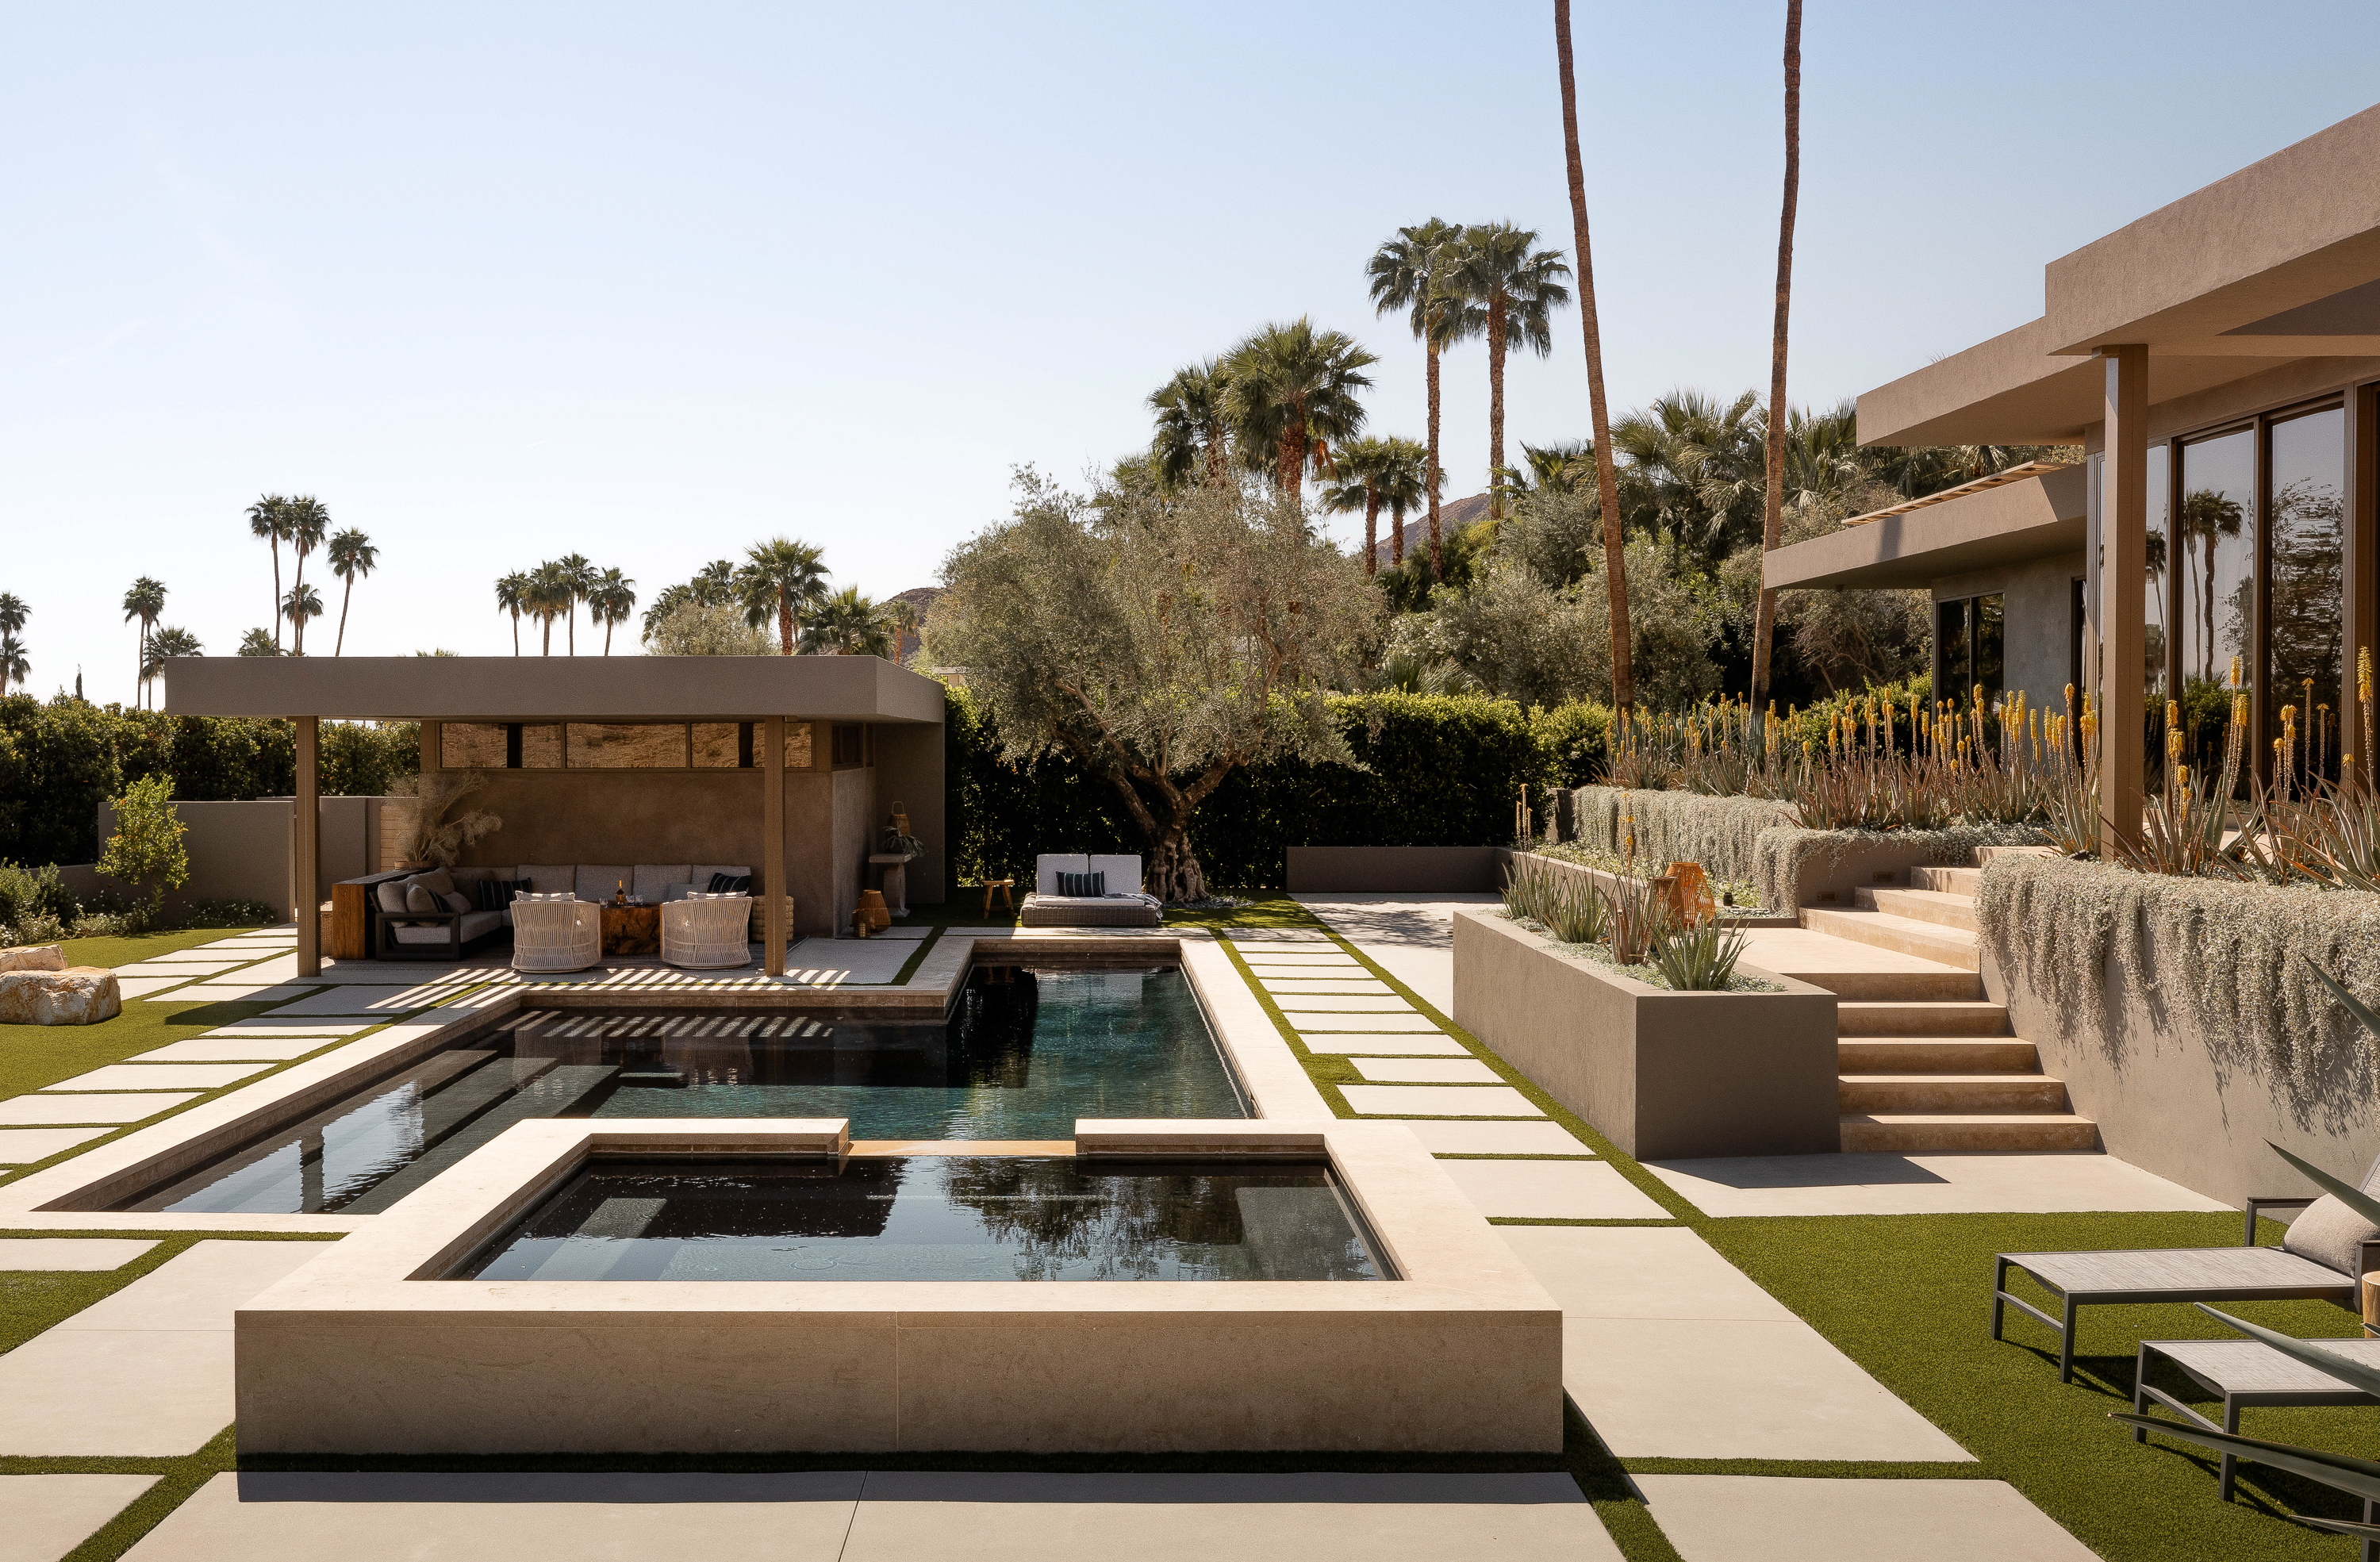 Pool area at Palm Sprinfs Retreat: Large cement pavers surround the pool, offering a contemporary and durable surface for lounging and enjoying the desert sun.